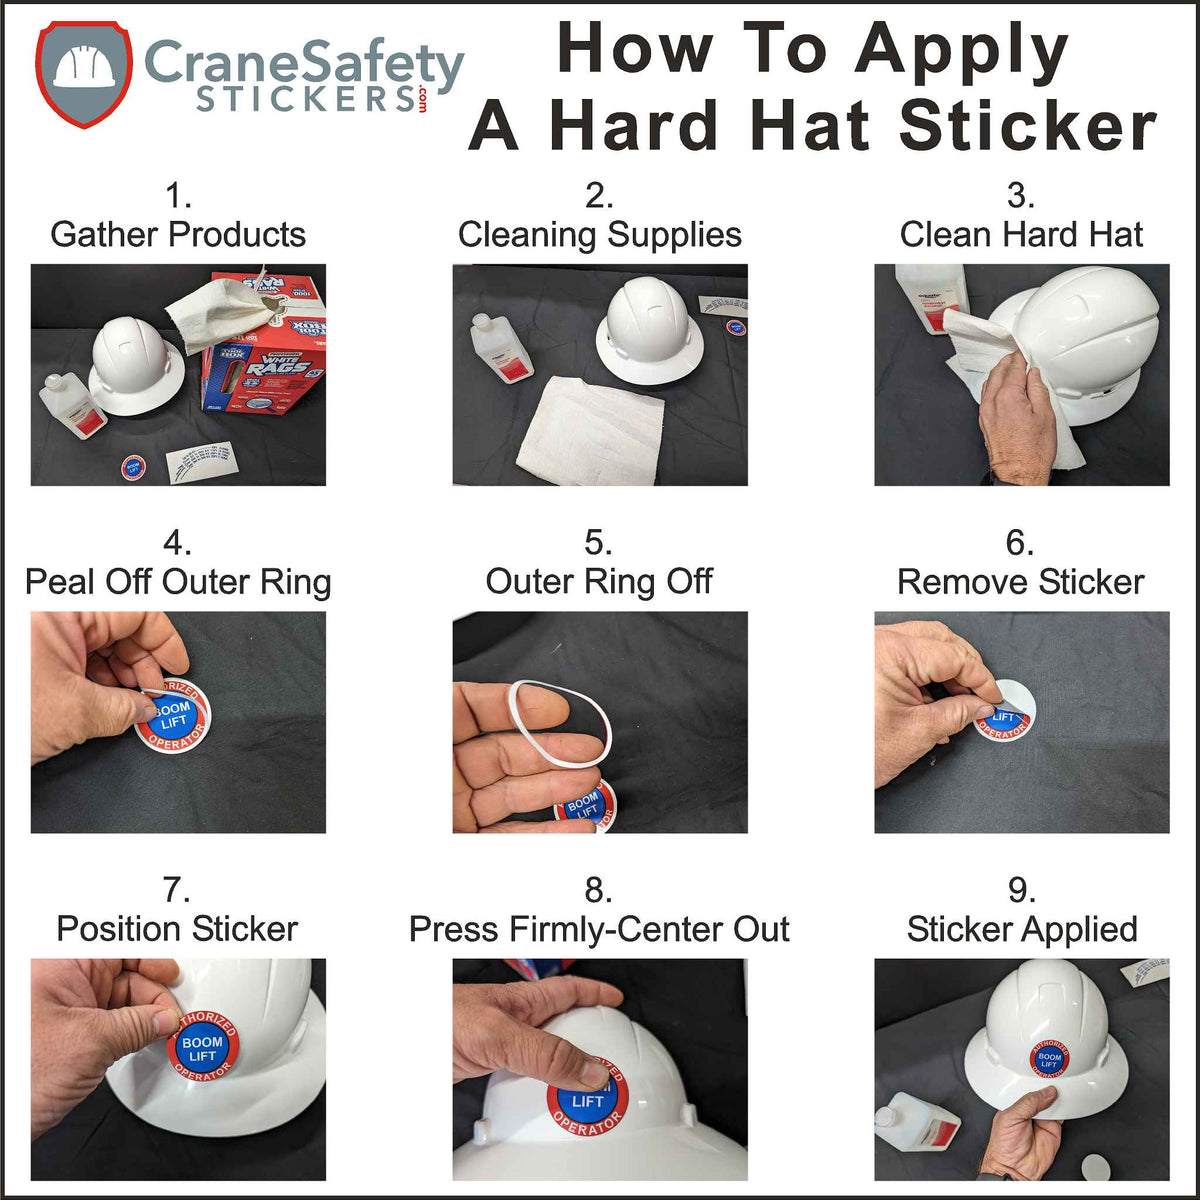 How To Apply Visitor hard hat sticker in red